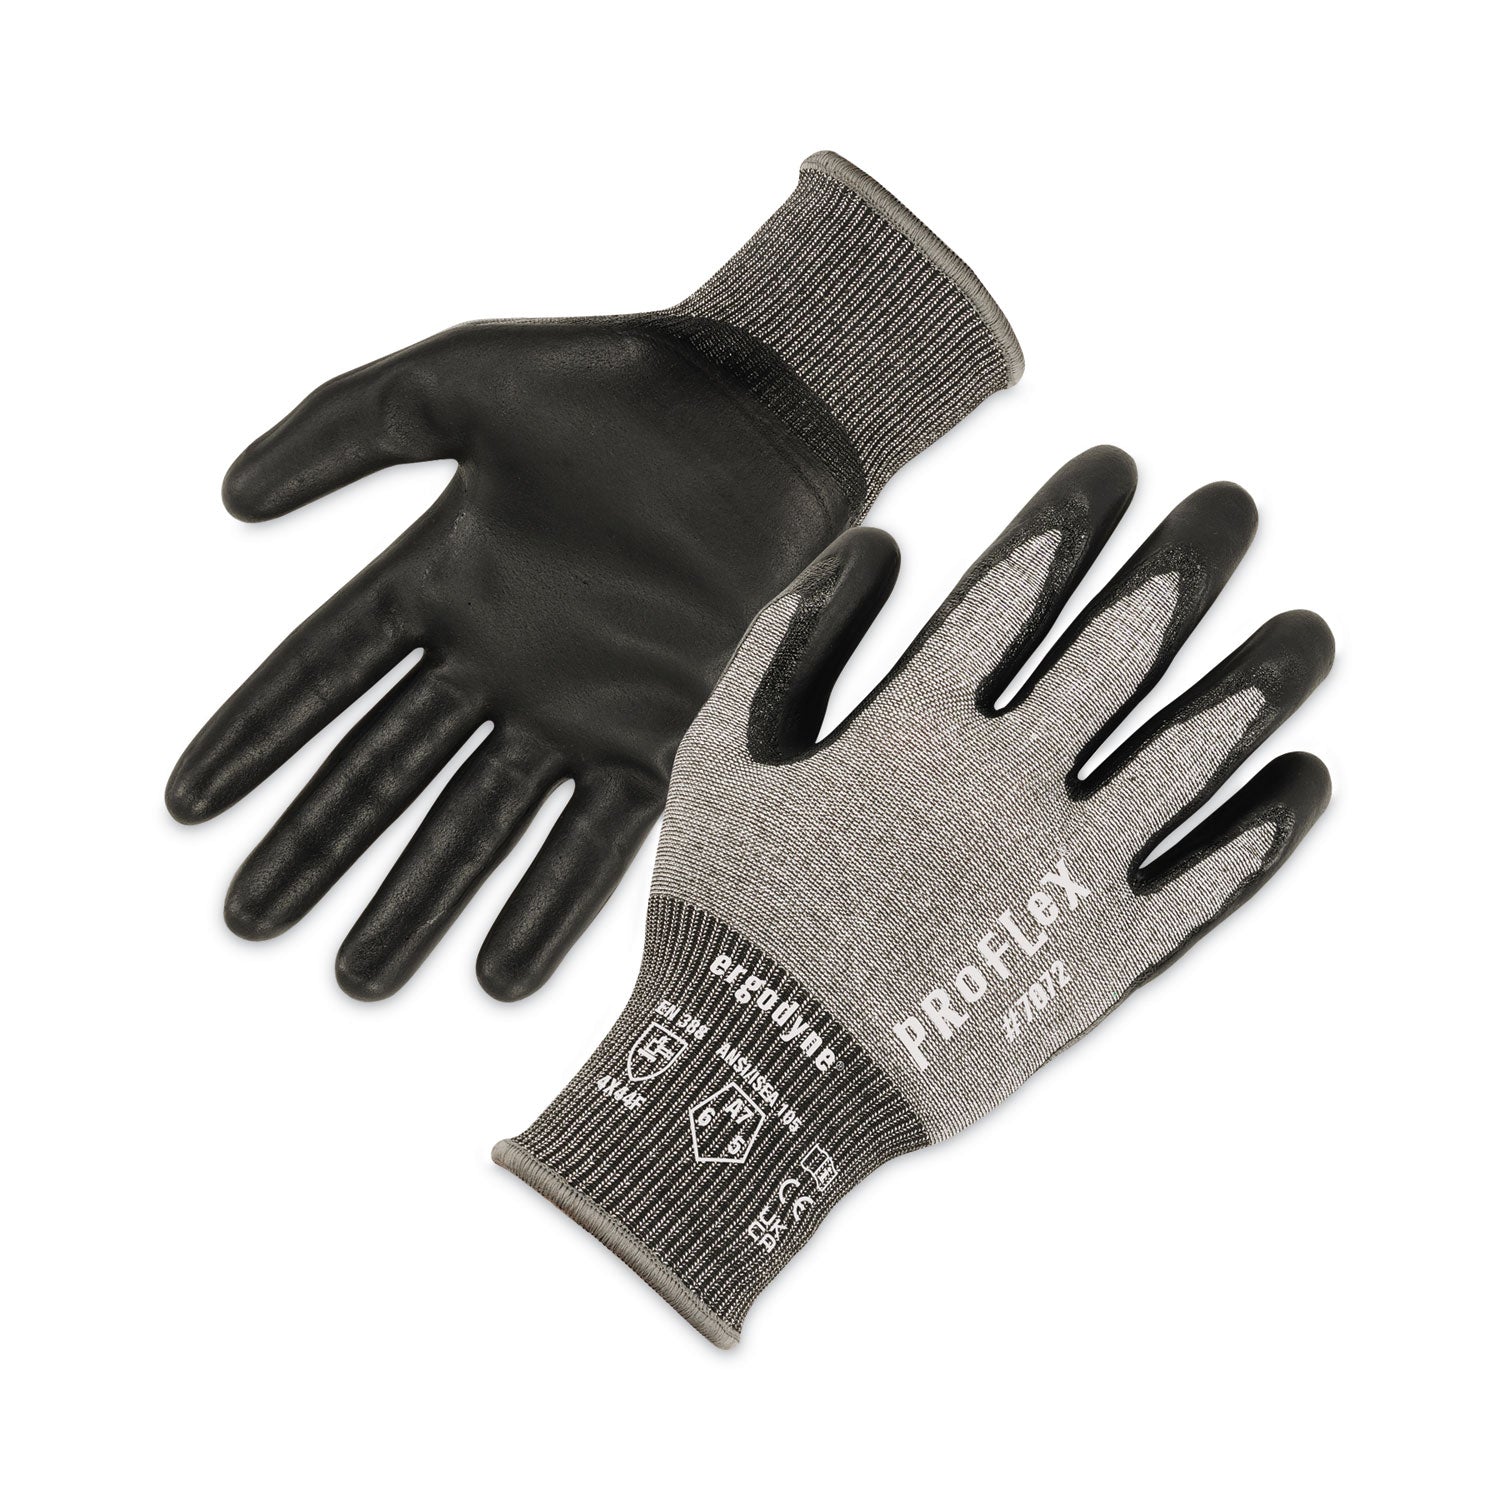 proflex-7072-ansi-a7-nitrile-coated-cr-gloves-gray-x-large-12-pairs-pack-ships-in-1-3-business-days_ego10305 - 1